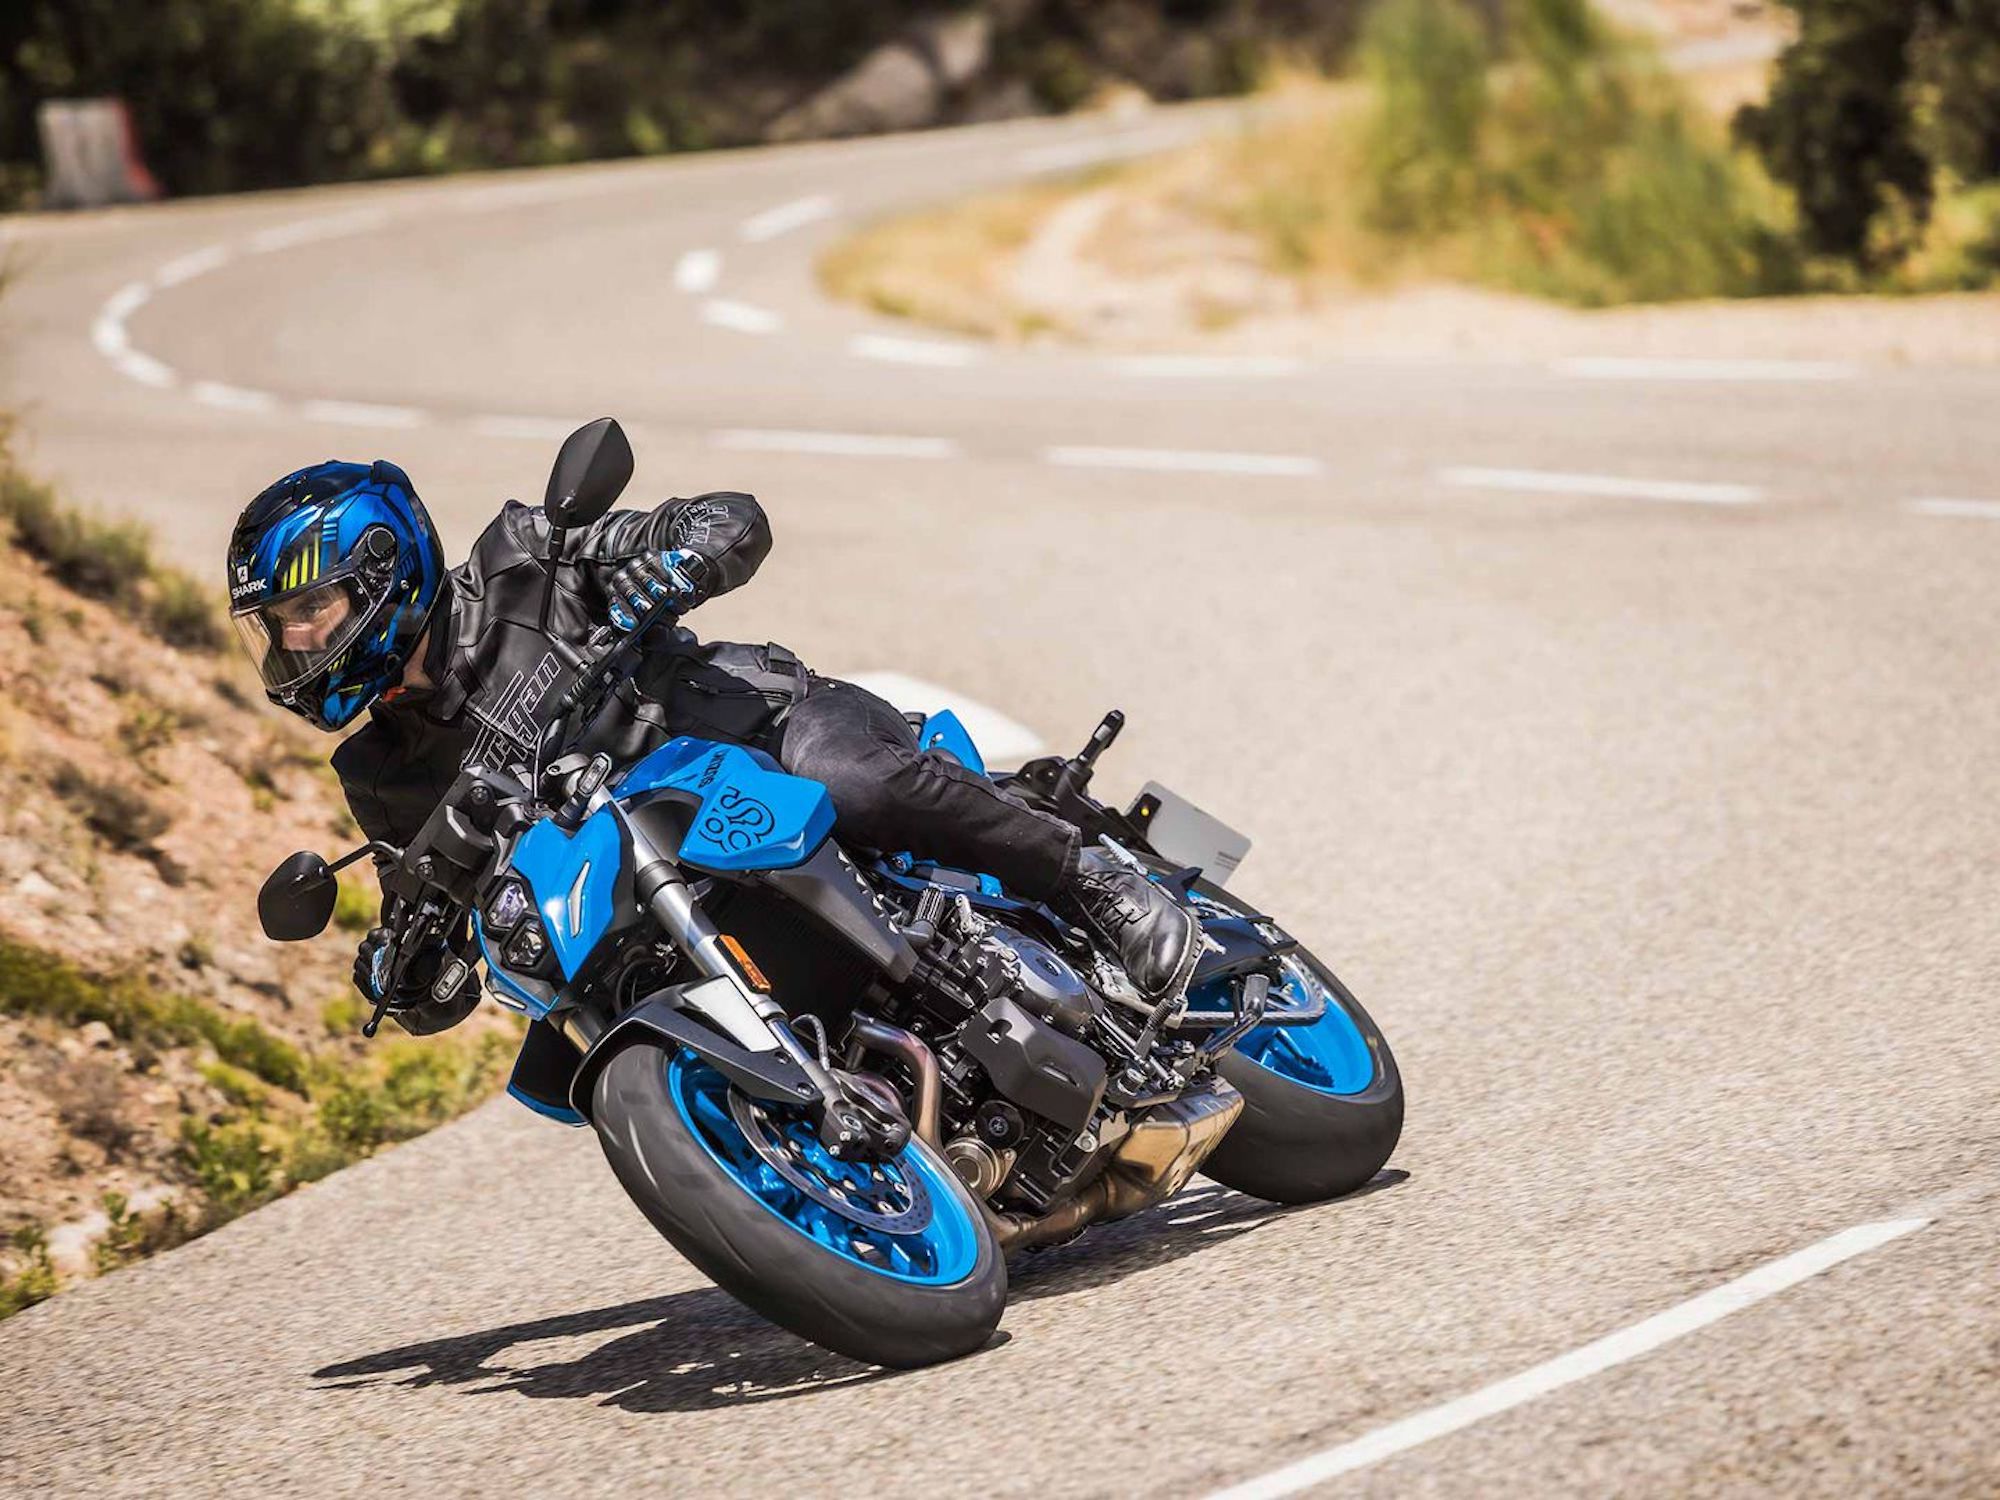 Meet the newest addition to Suzuki’s GSX line: The GSX-8S. Media sourced from MotorcyclistOnline.